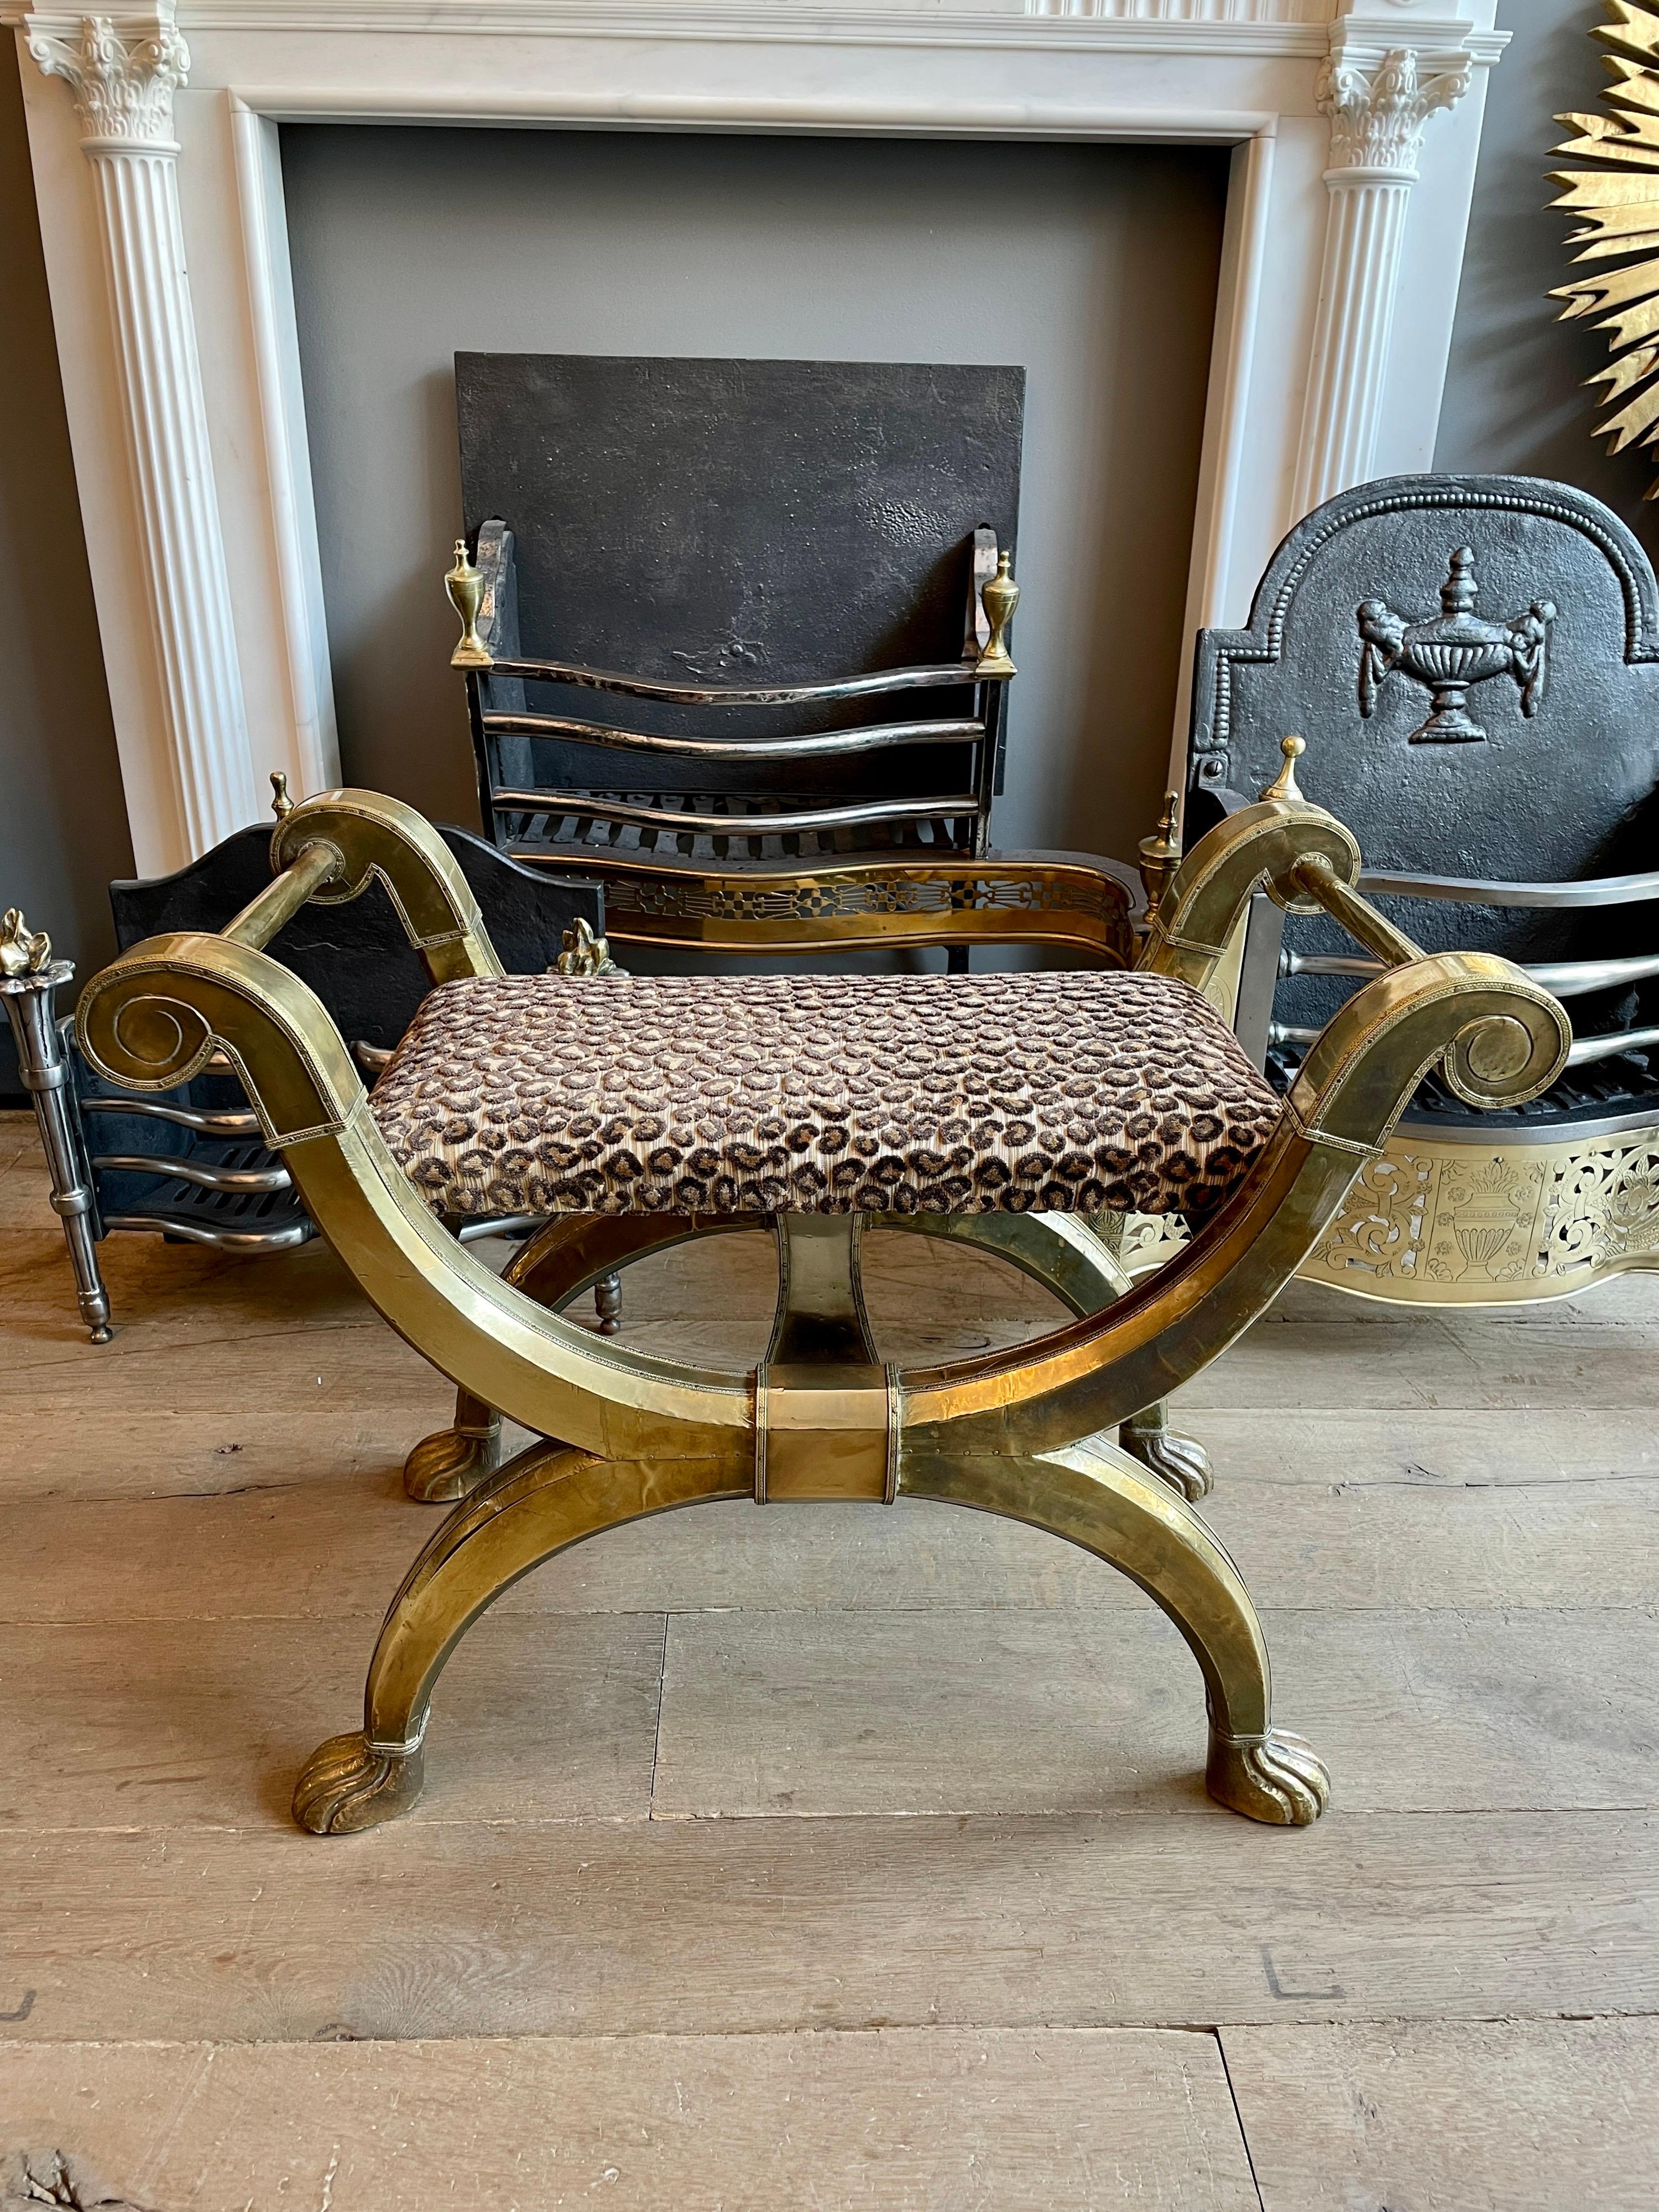 A mid to late 20th century stool in the Empire manner, the frame covered in hand worked and stamped brass. The scrolled handled frame terminating in paw feet. The seat reupholstered in cut leopard print fabric. Attributed to Rodolfo Dubarry.